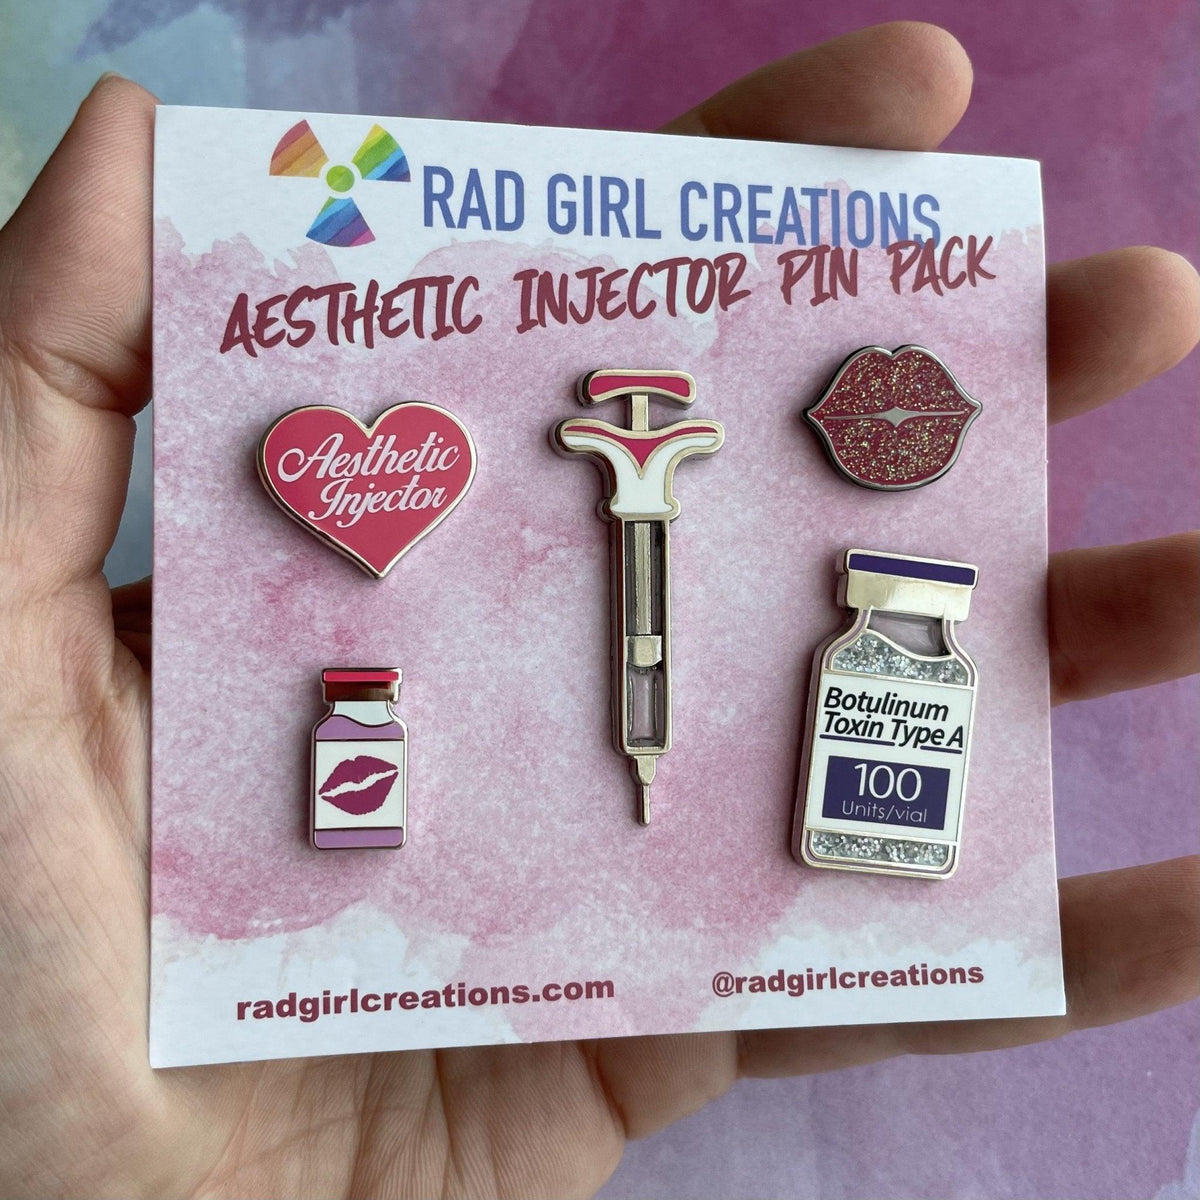 Aesthetic Injector Pin Pack - Rad Girl Creations